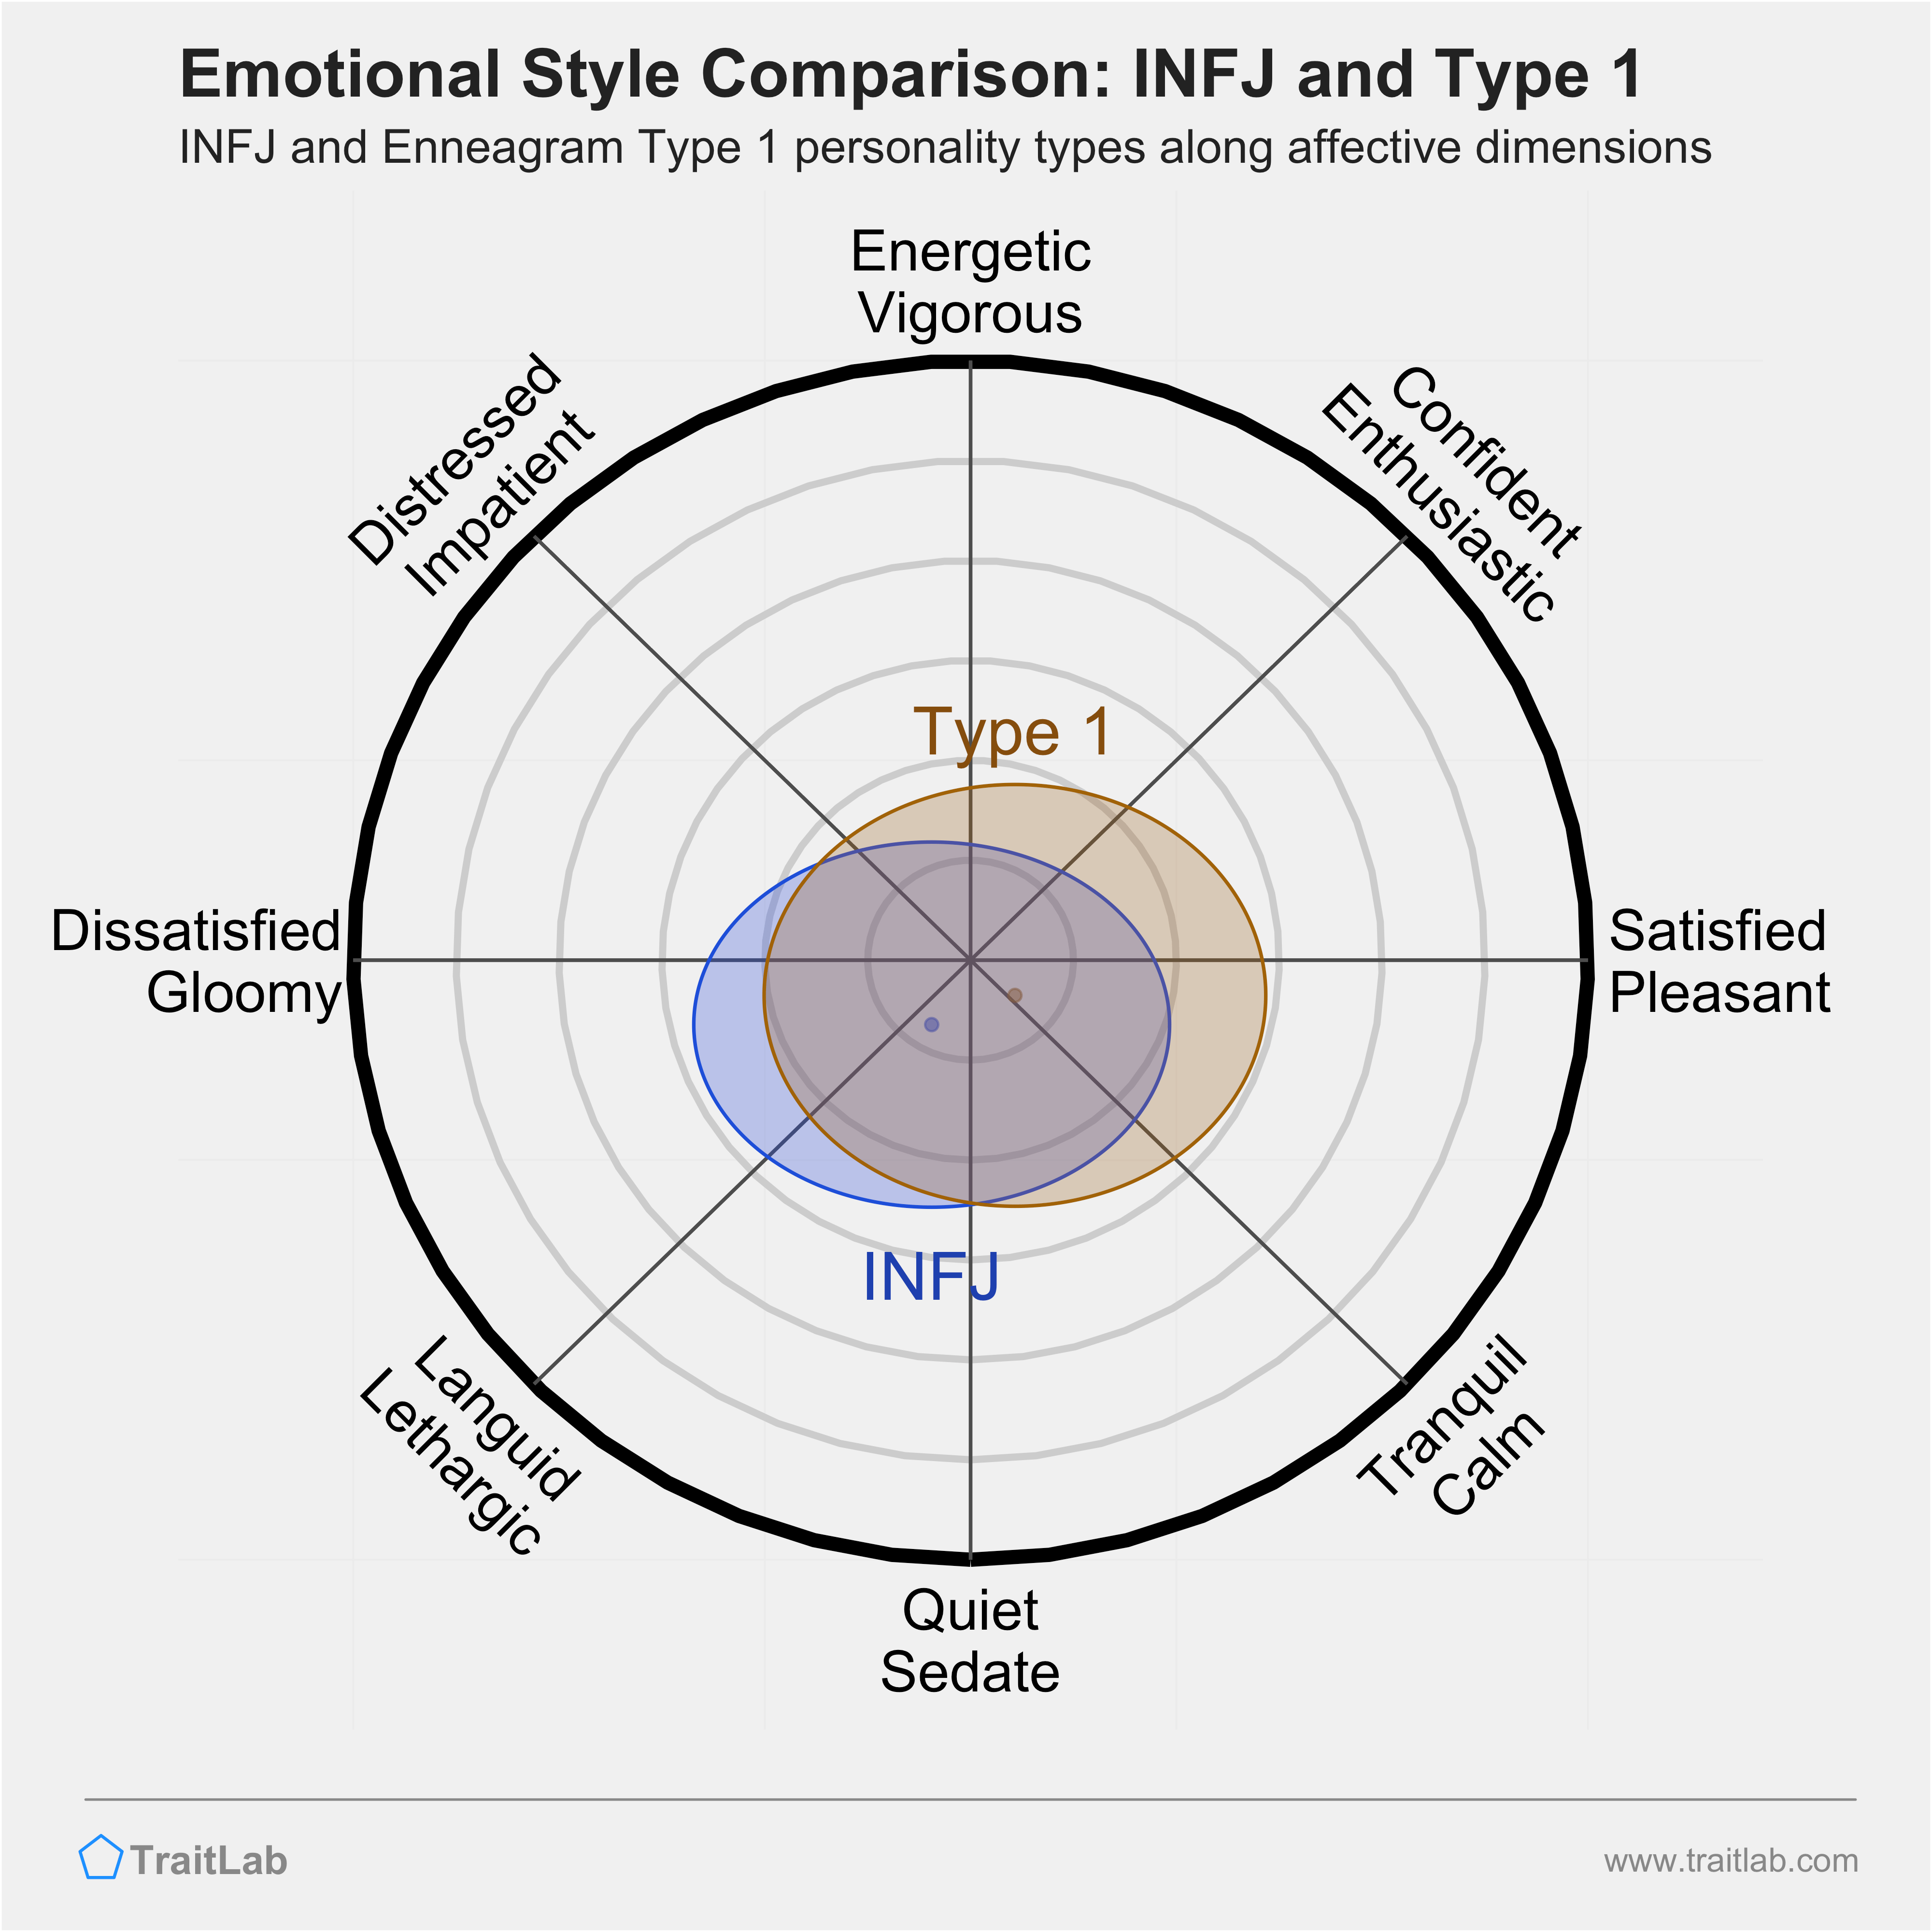 INFJ and Type 1 comparison across emotional (affective) dimensions